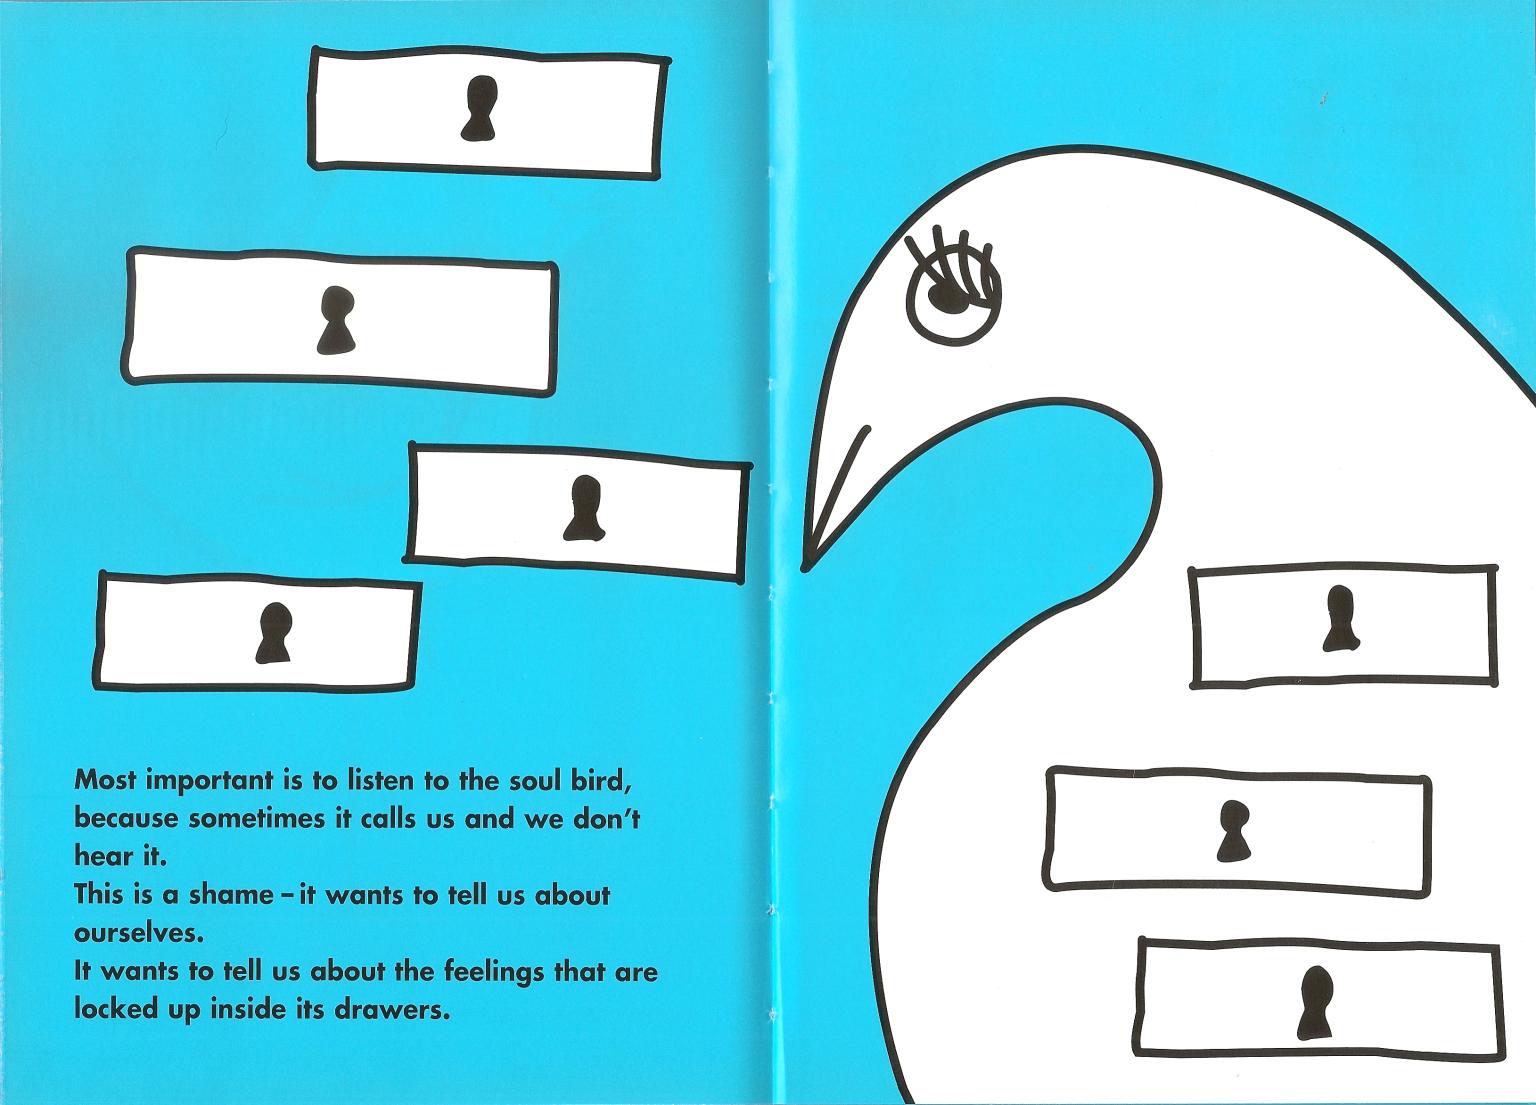 Image of bird surrounded by rectangular boxes and English text on bottom left of page describing the soul bird. 